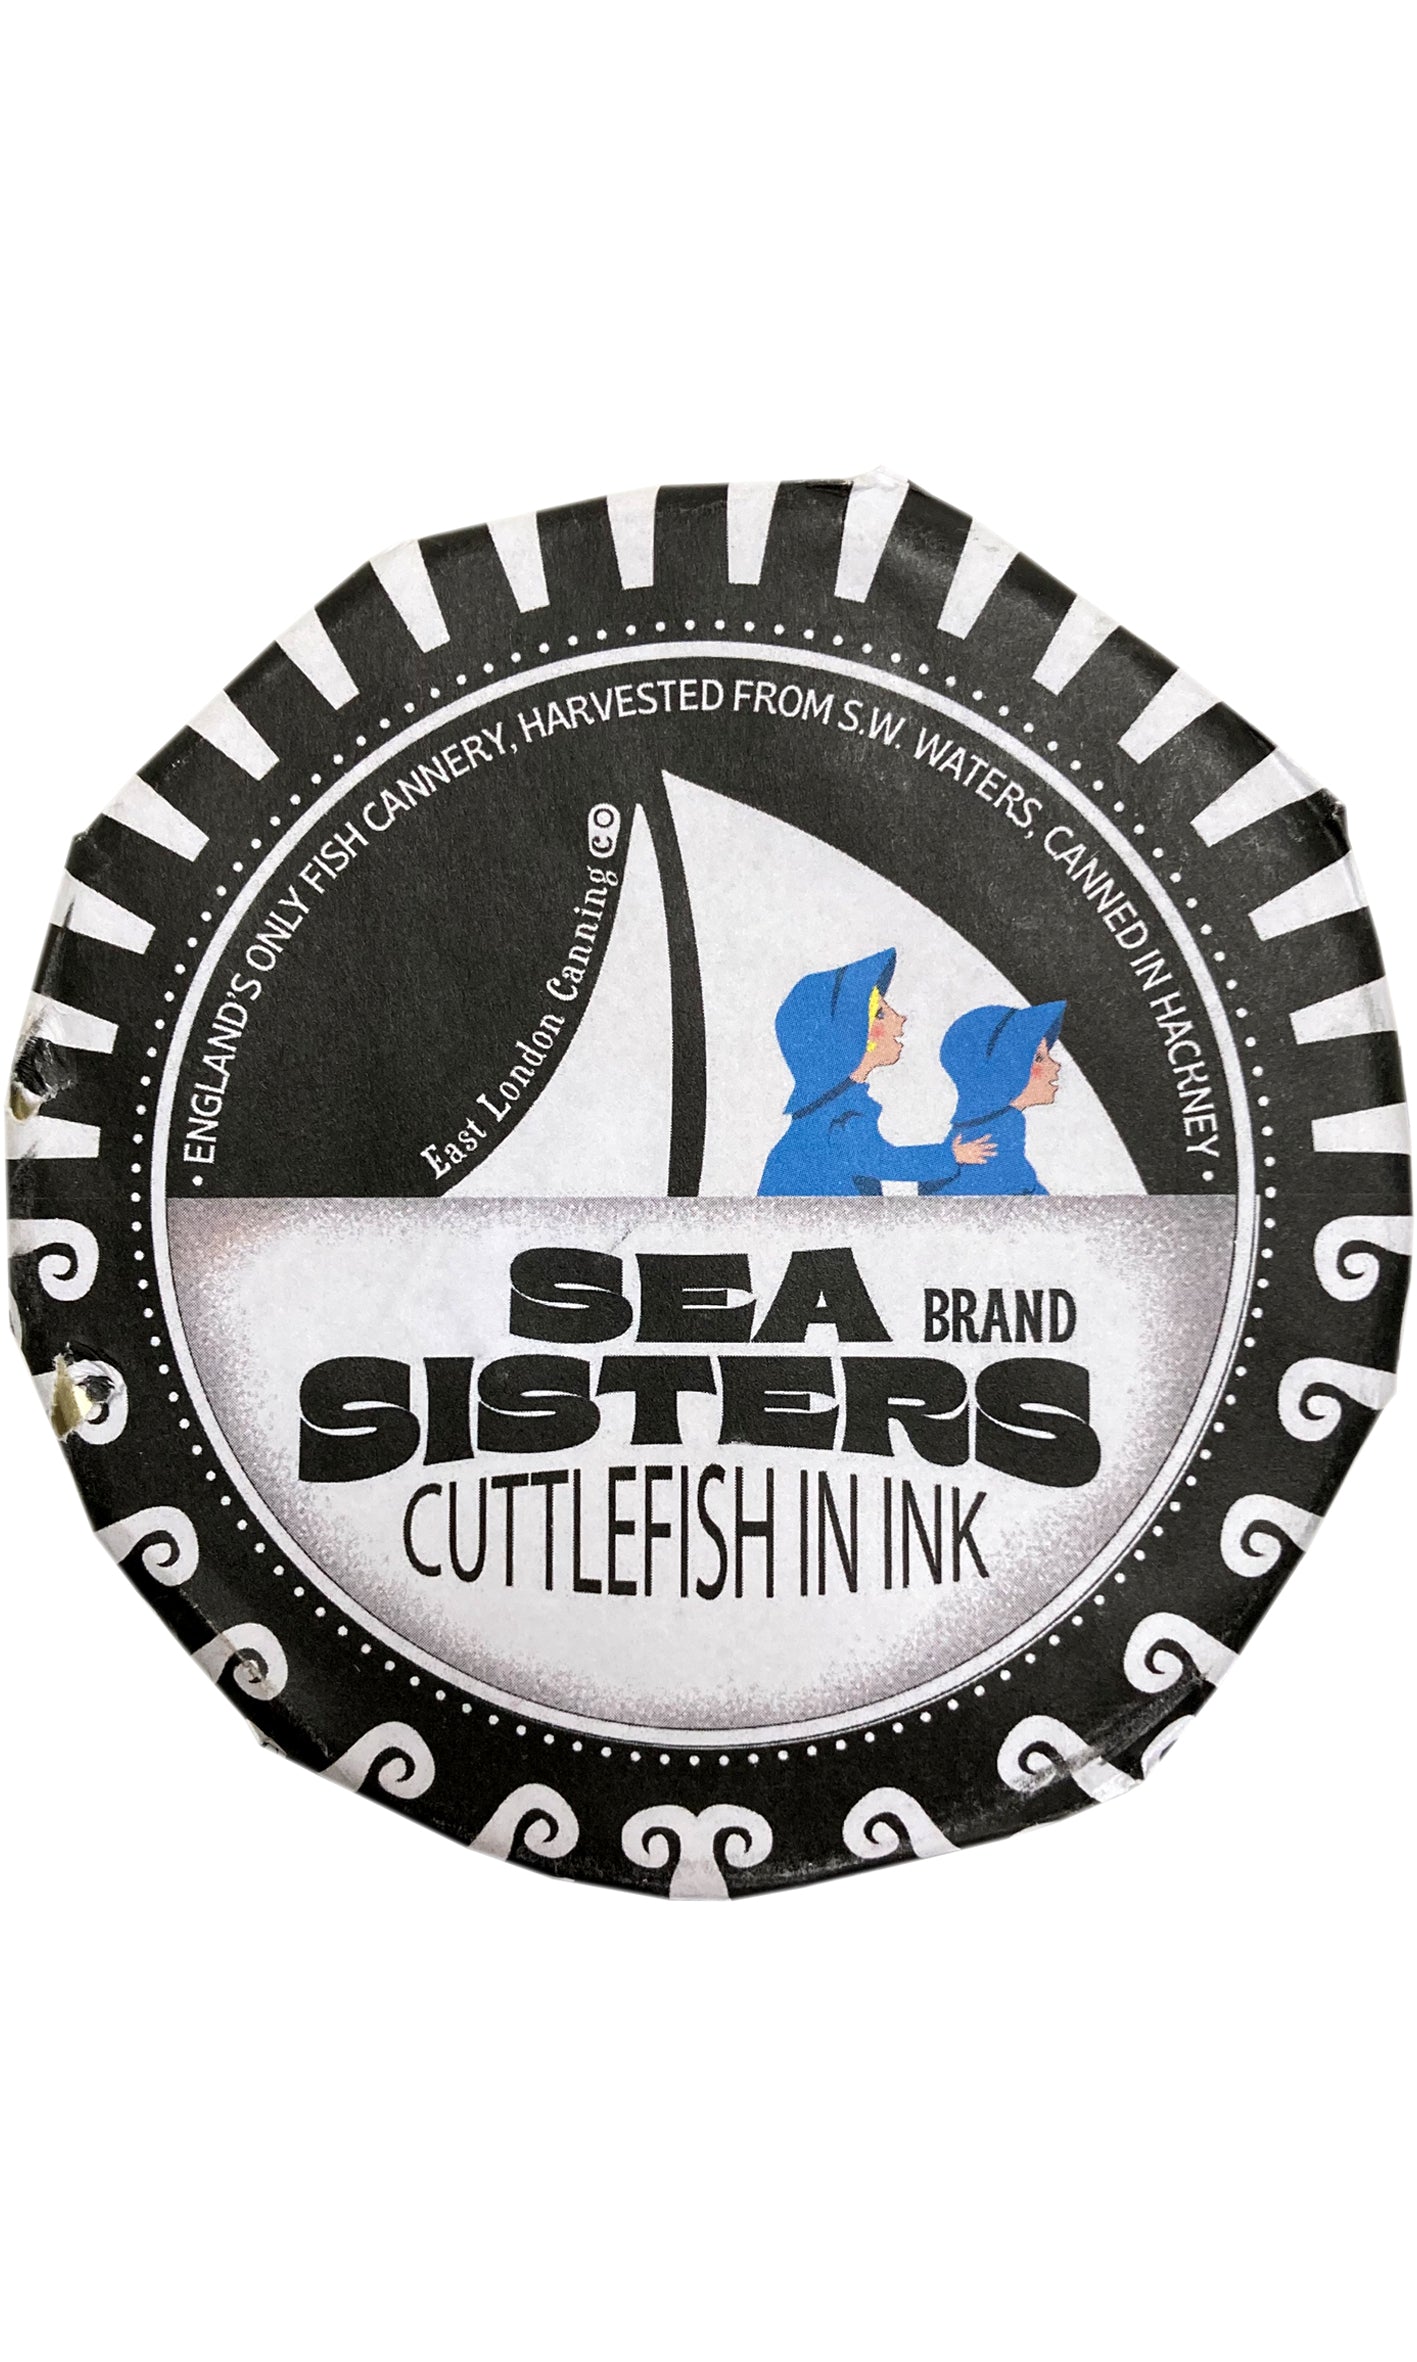 Sea Sisters - Cuttlefish in Ink - 125g